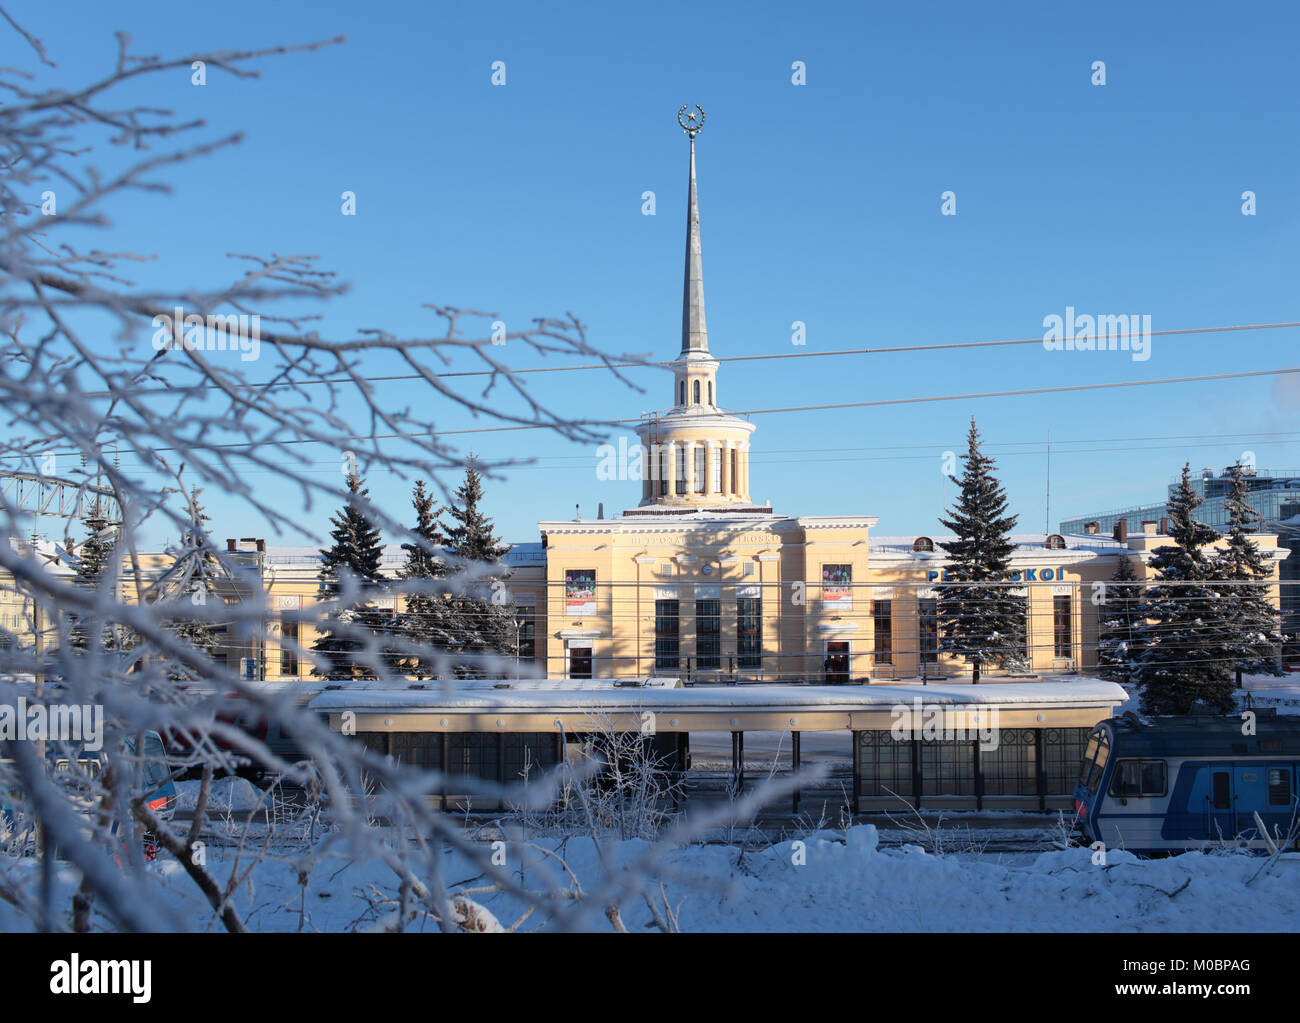 Petrozavodsk, Russia - January 18, 2013: Commuter trains on the railway station of Petrozavodsk, Karelia, Russia on January 18, 2013. The building was Stock Photo